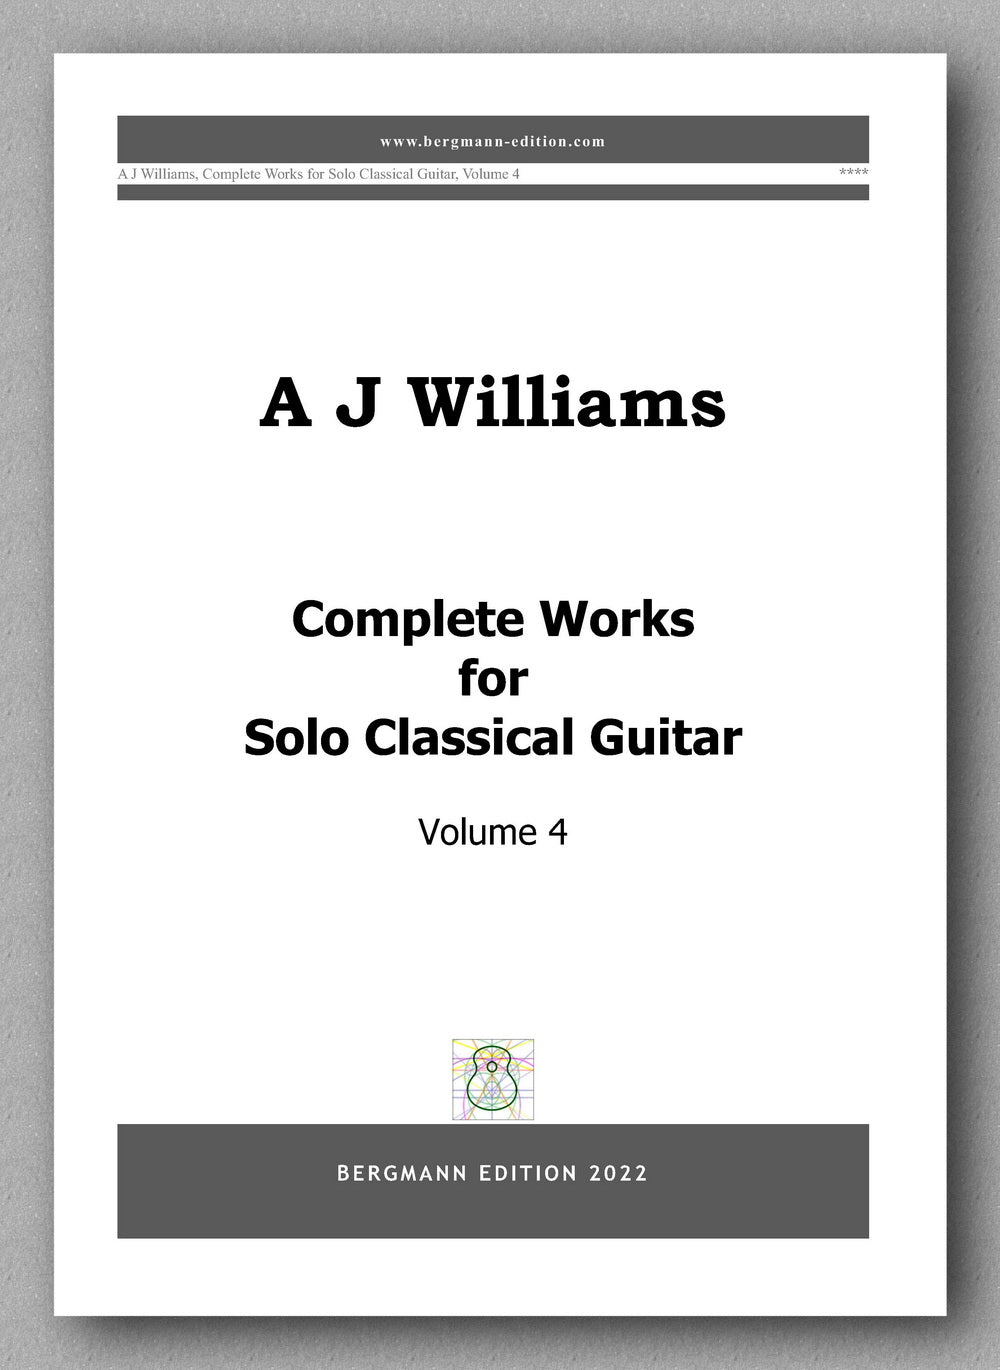 Andrew Williams, Complete Works for Solo Guitar 4